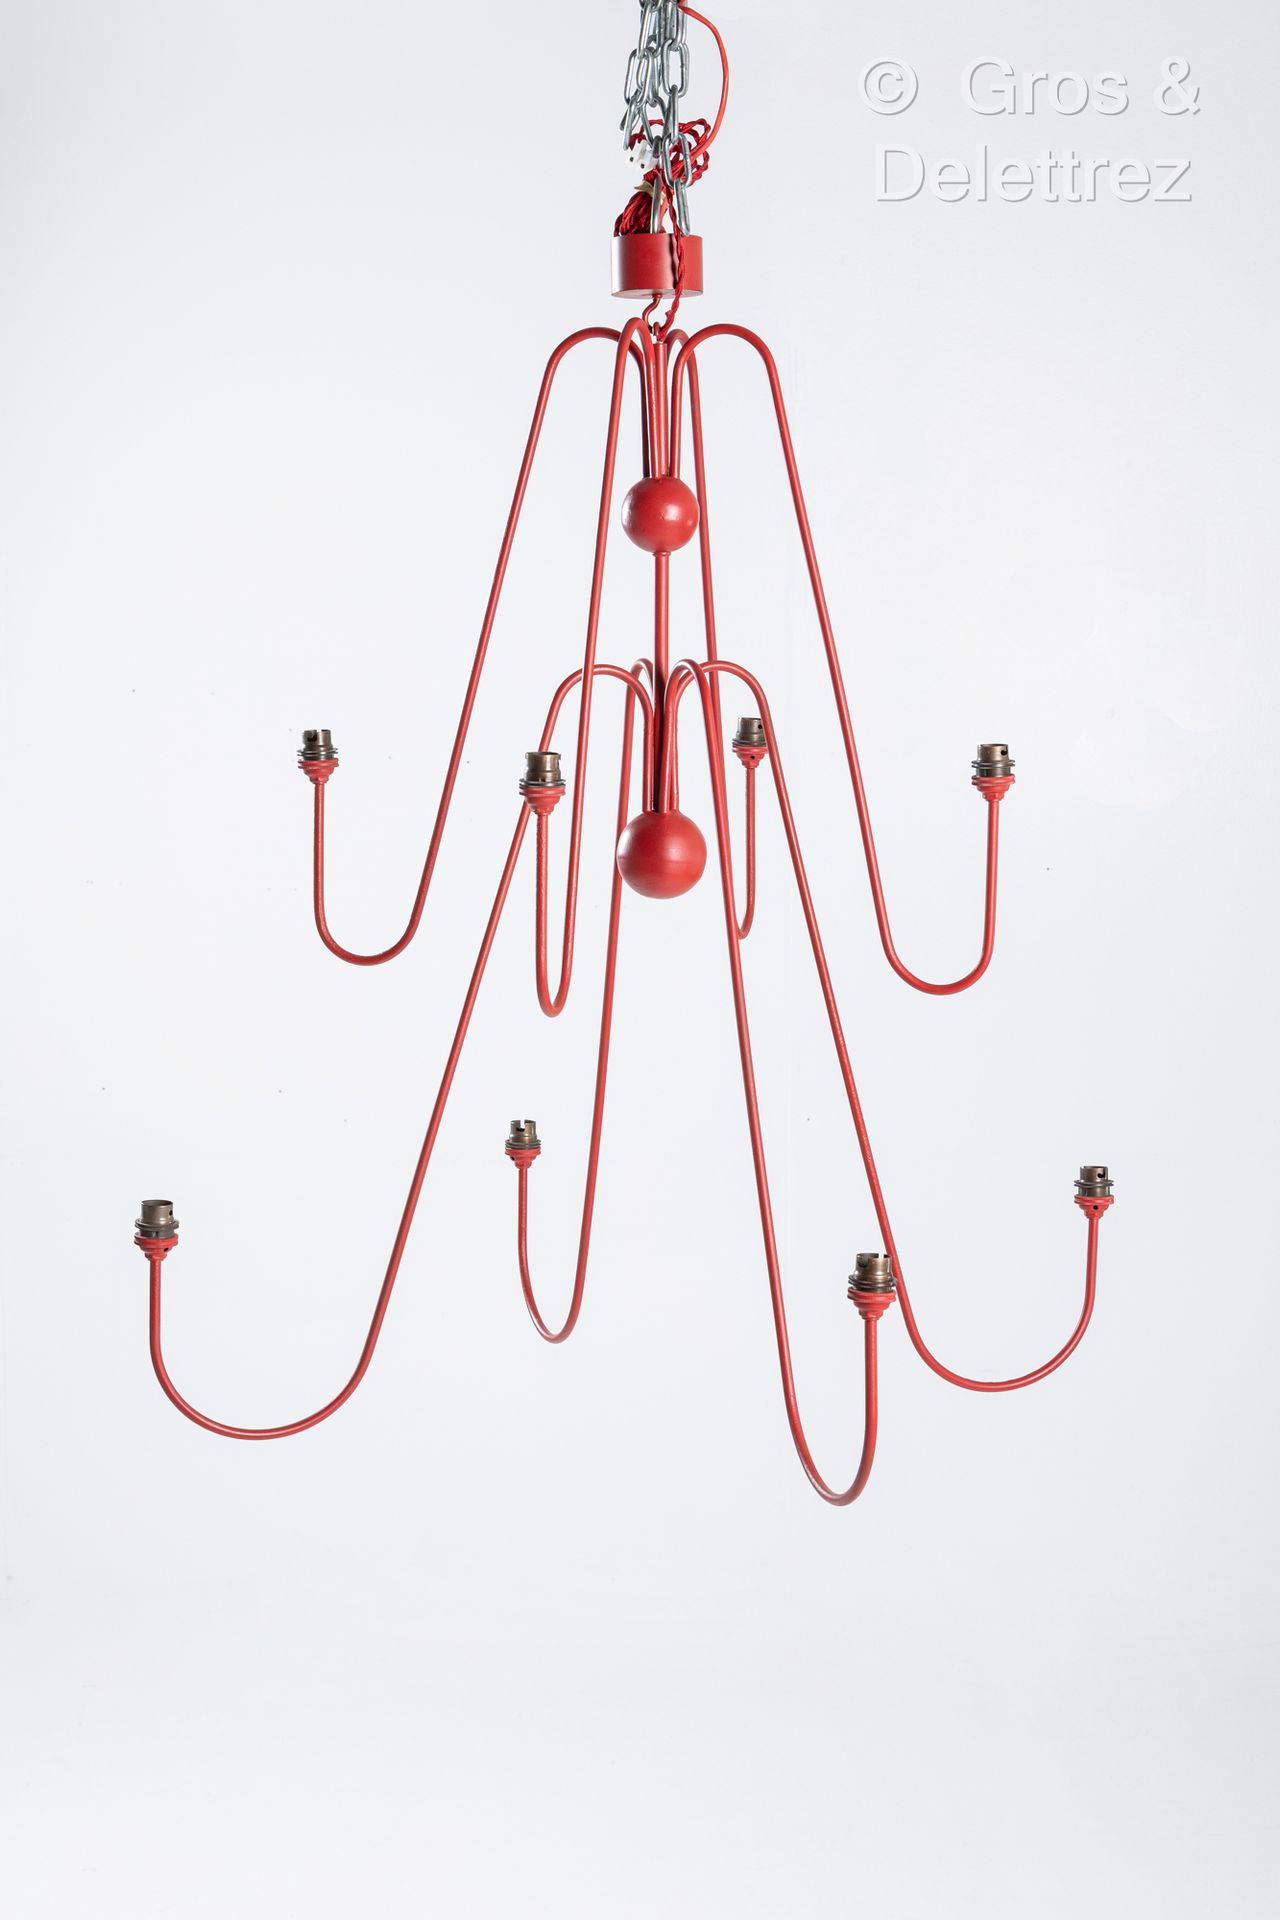 Null Jean ROYERE (1902-1981)
Eight-light "Bouquet" chandelier in red lacquered m&hellip;